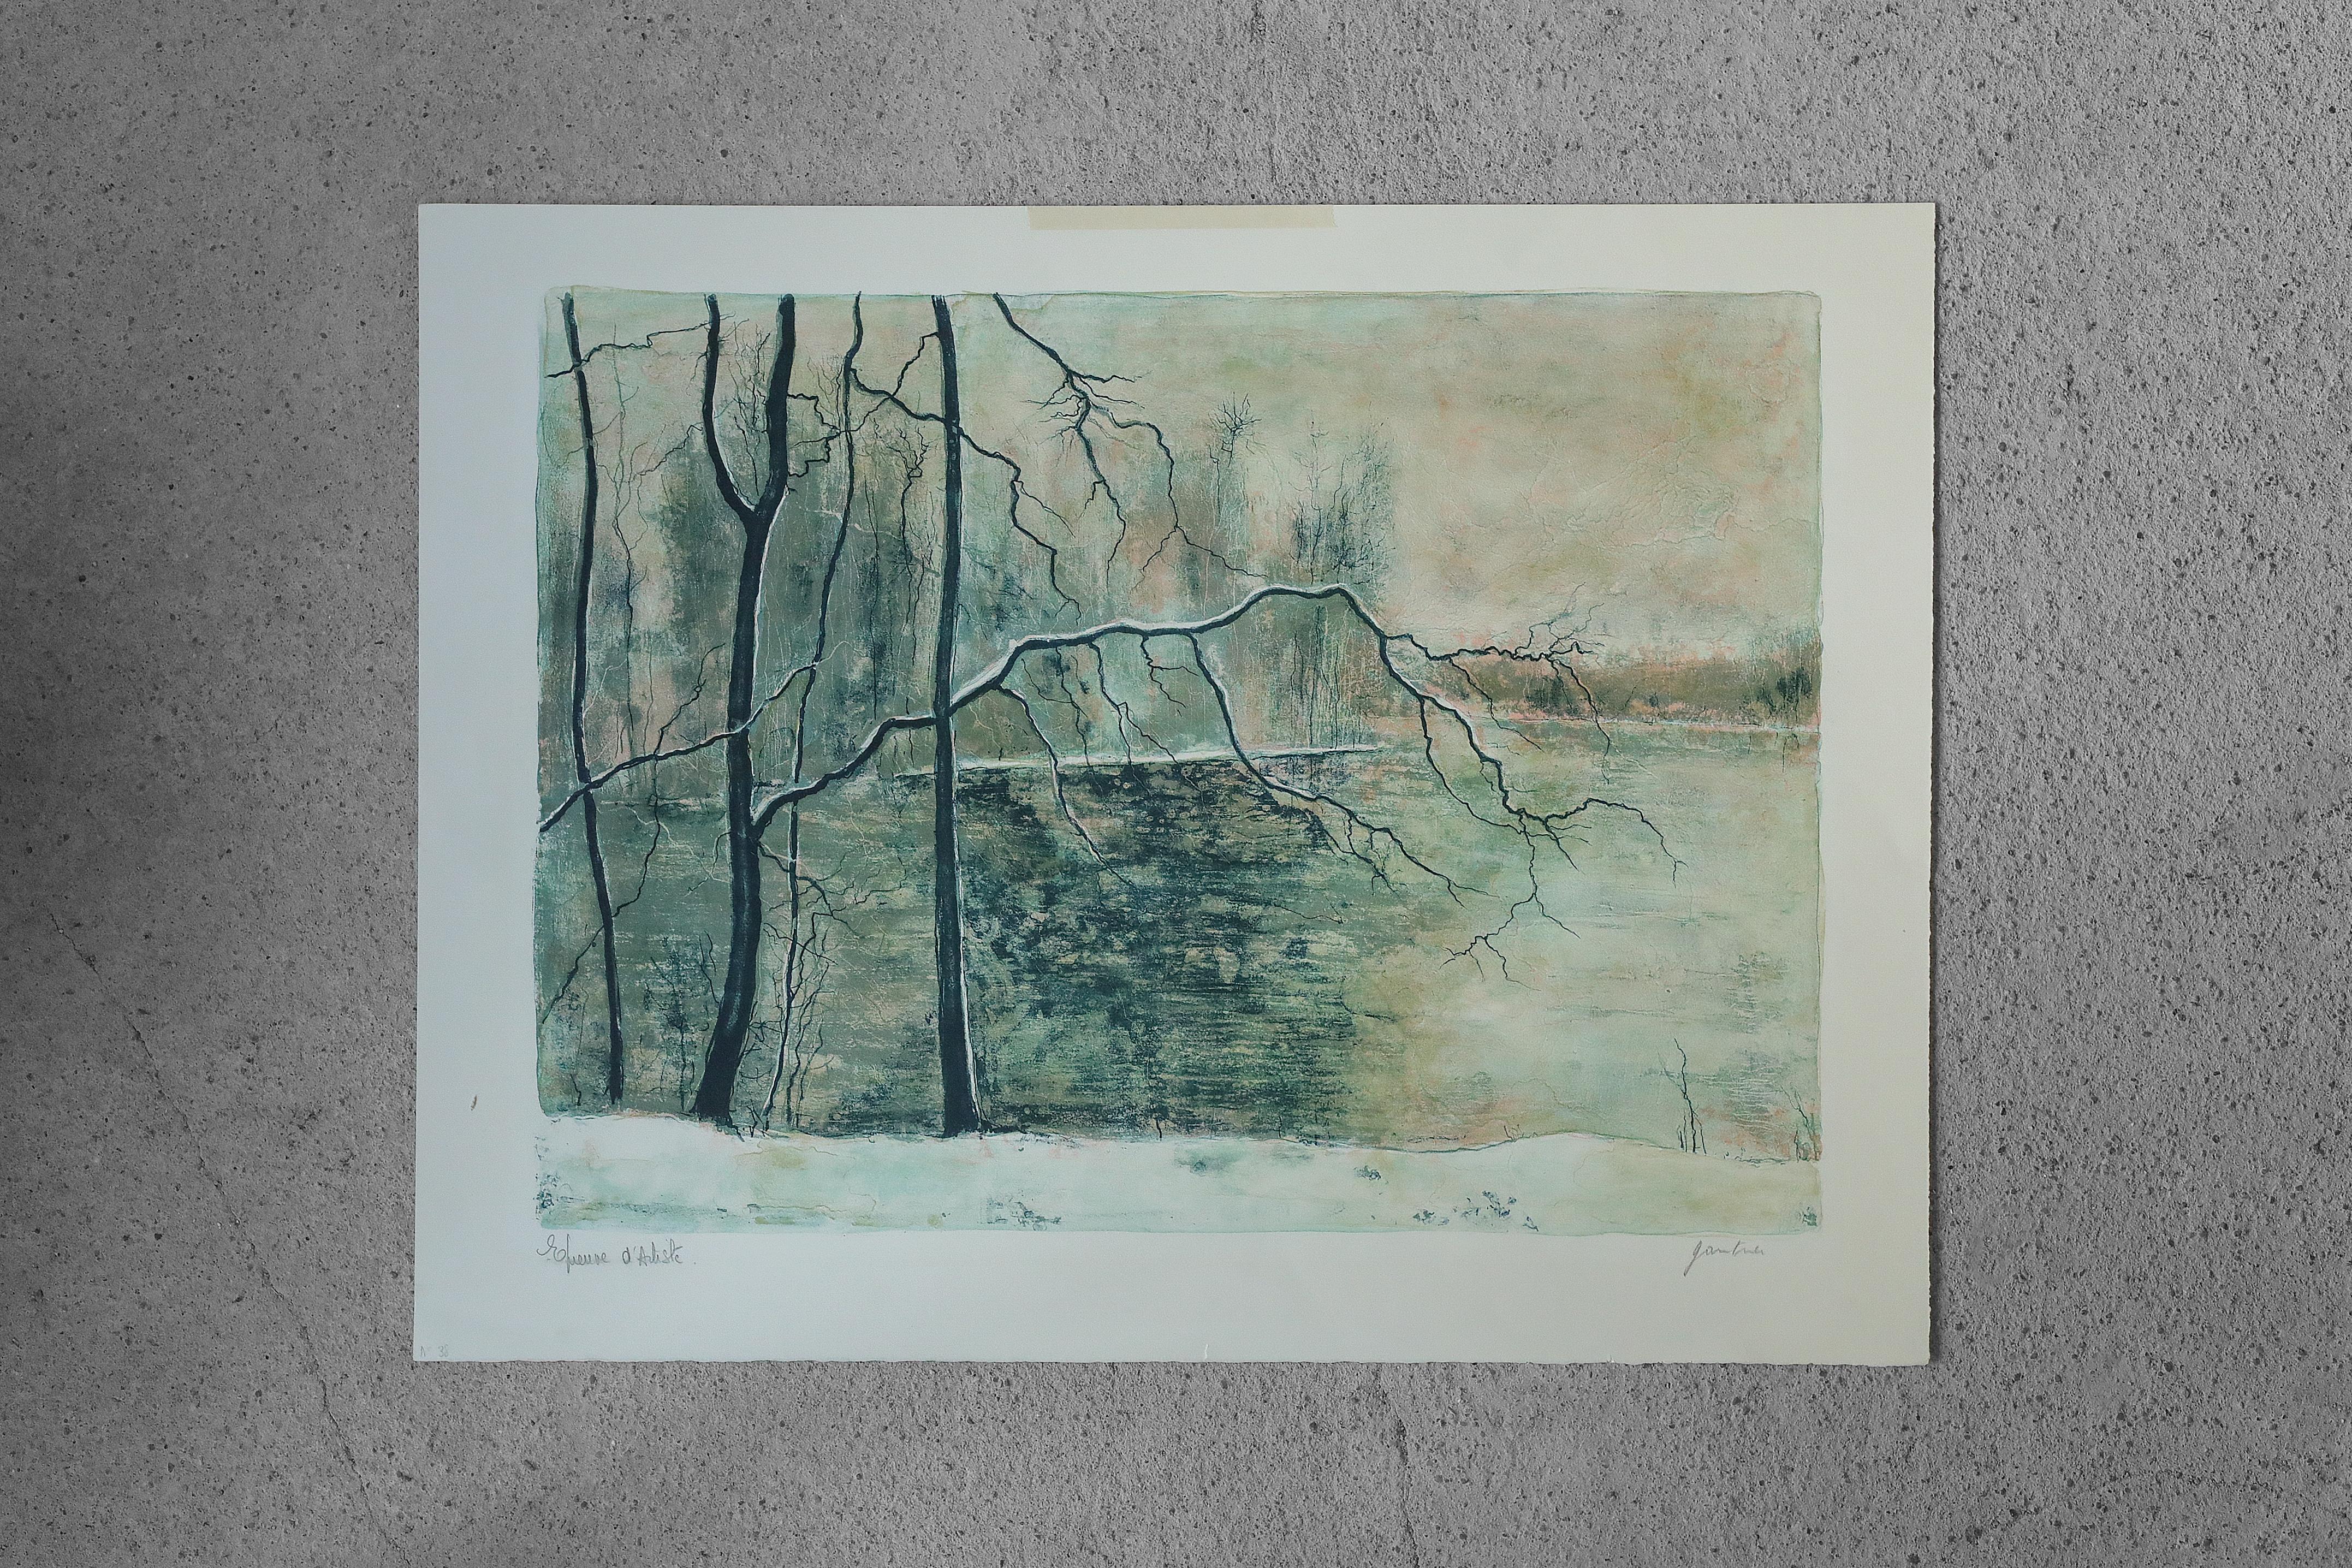 Bernard Gantner, Lac Hivernal Aux Voges, 1970s
Lithograph on woven paper
Number 38
The work is signed by the artist and individually numbered (pencil)
Sheet dimensions 50/65
Unframed work

Bernard Gantner (1928 - 2018) was a French painter. He is